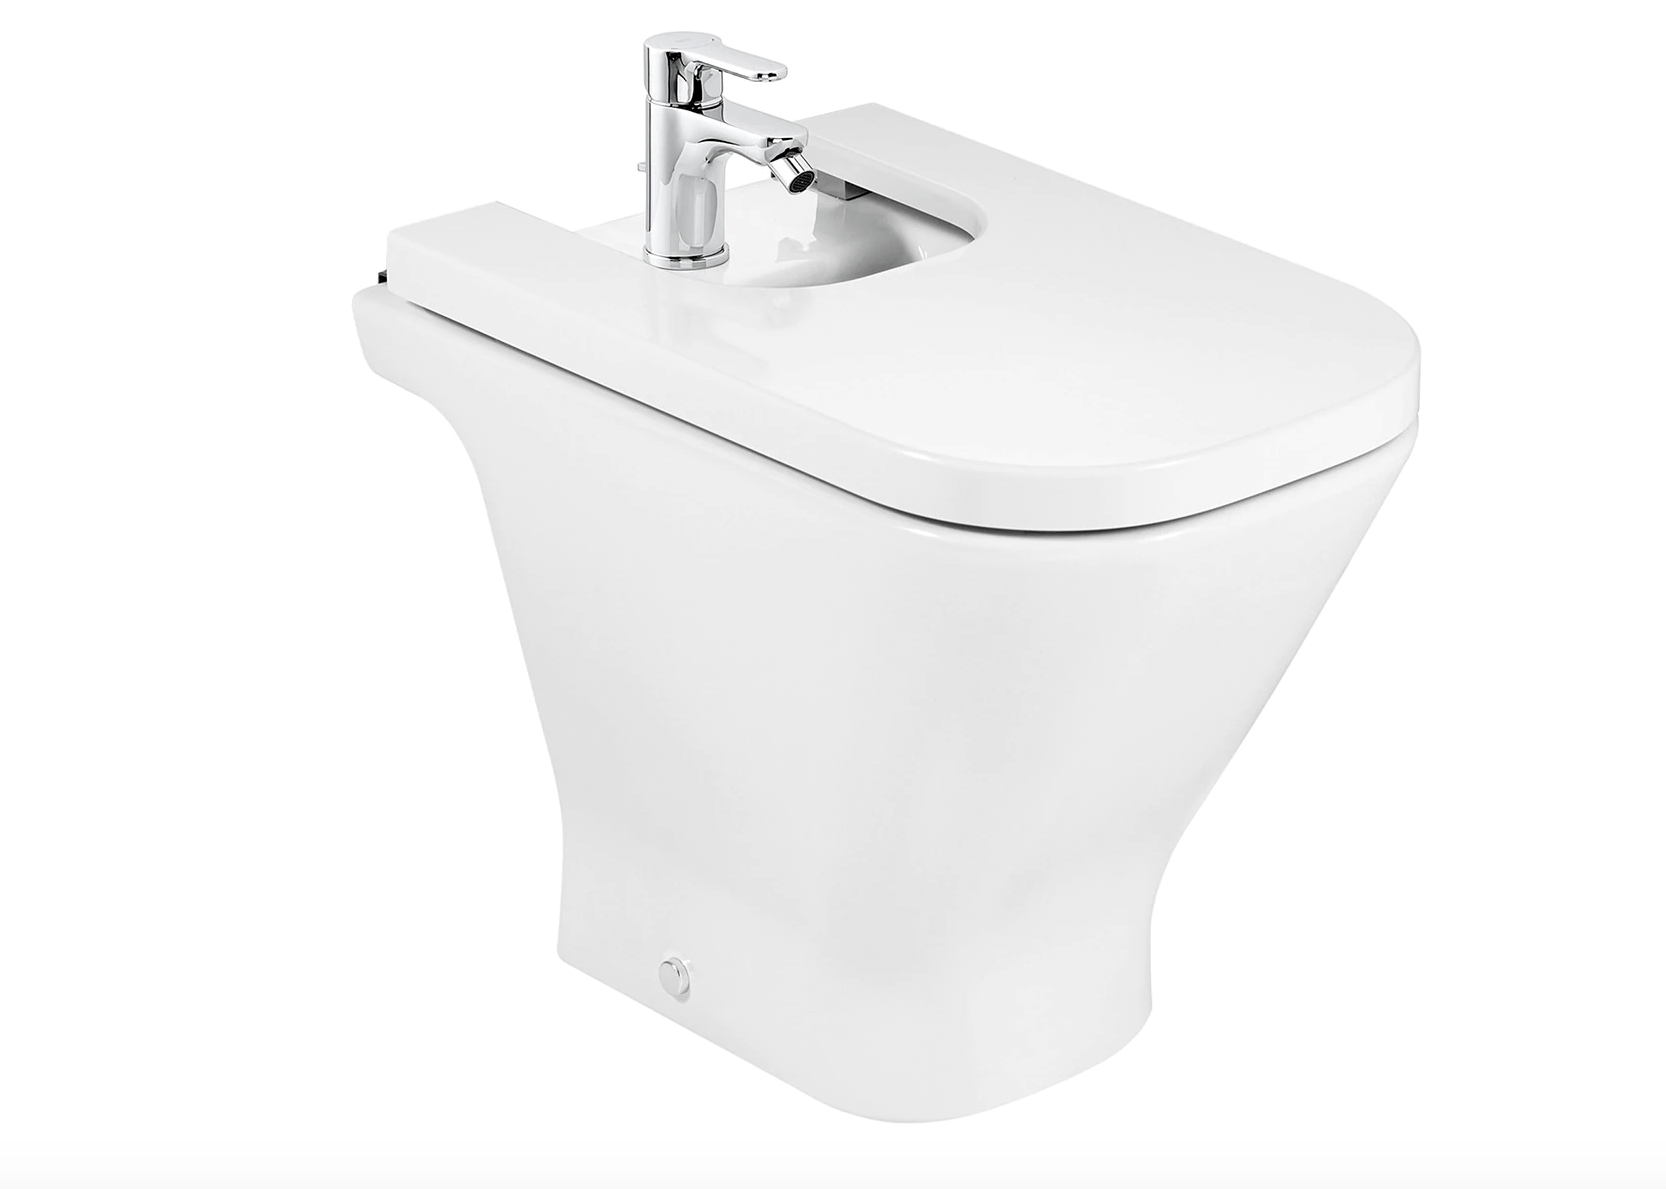 Bidet with cover for bathroom